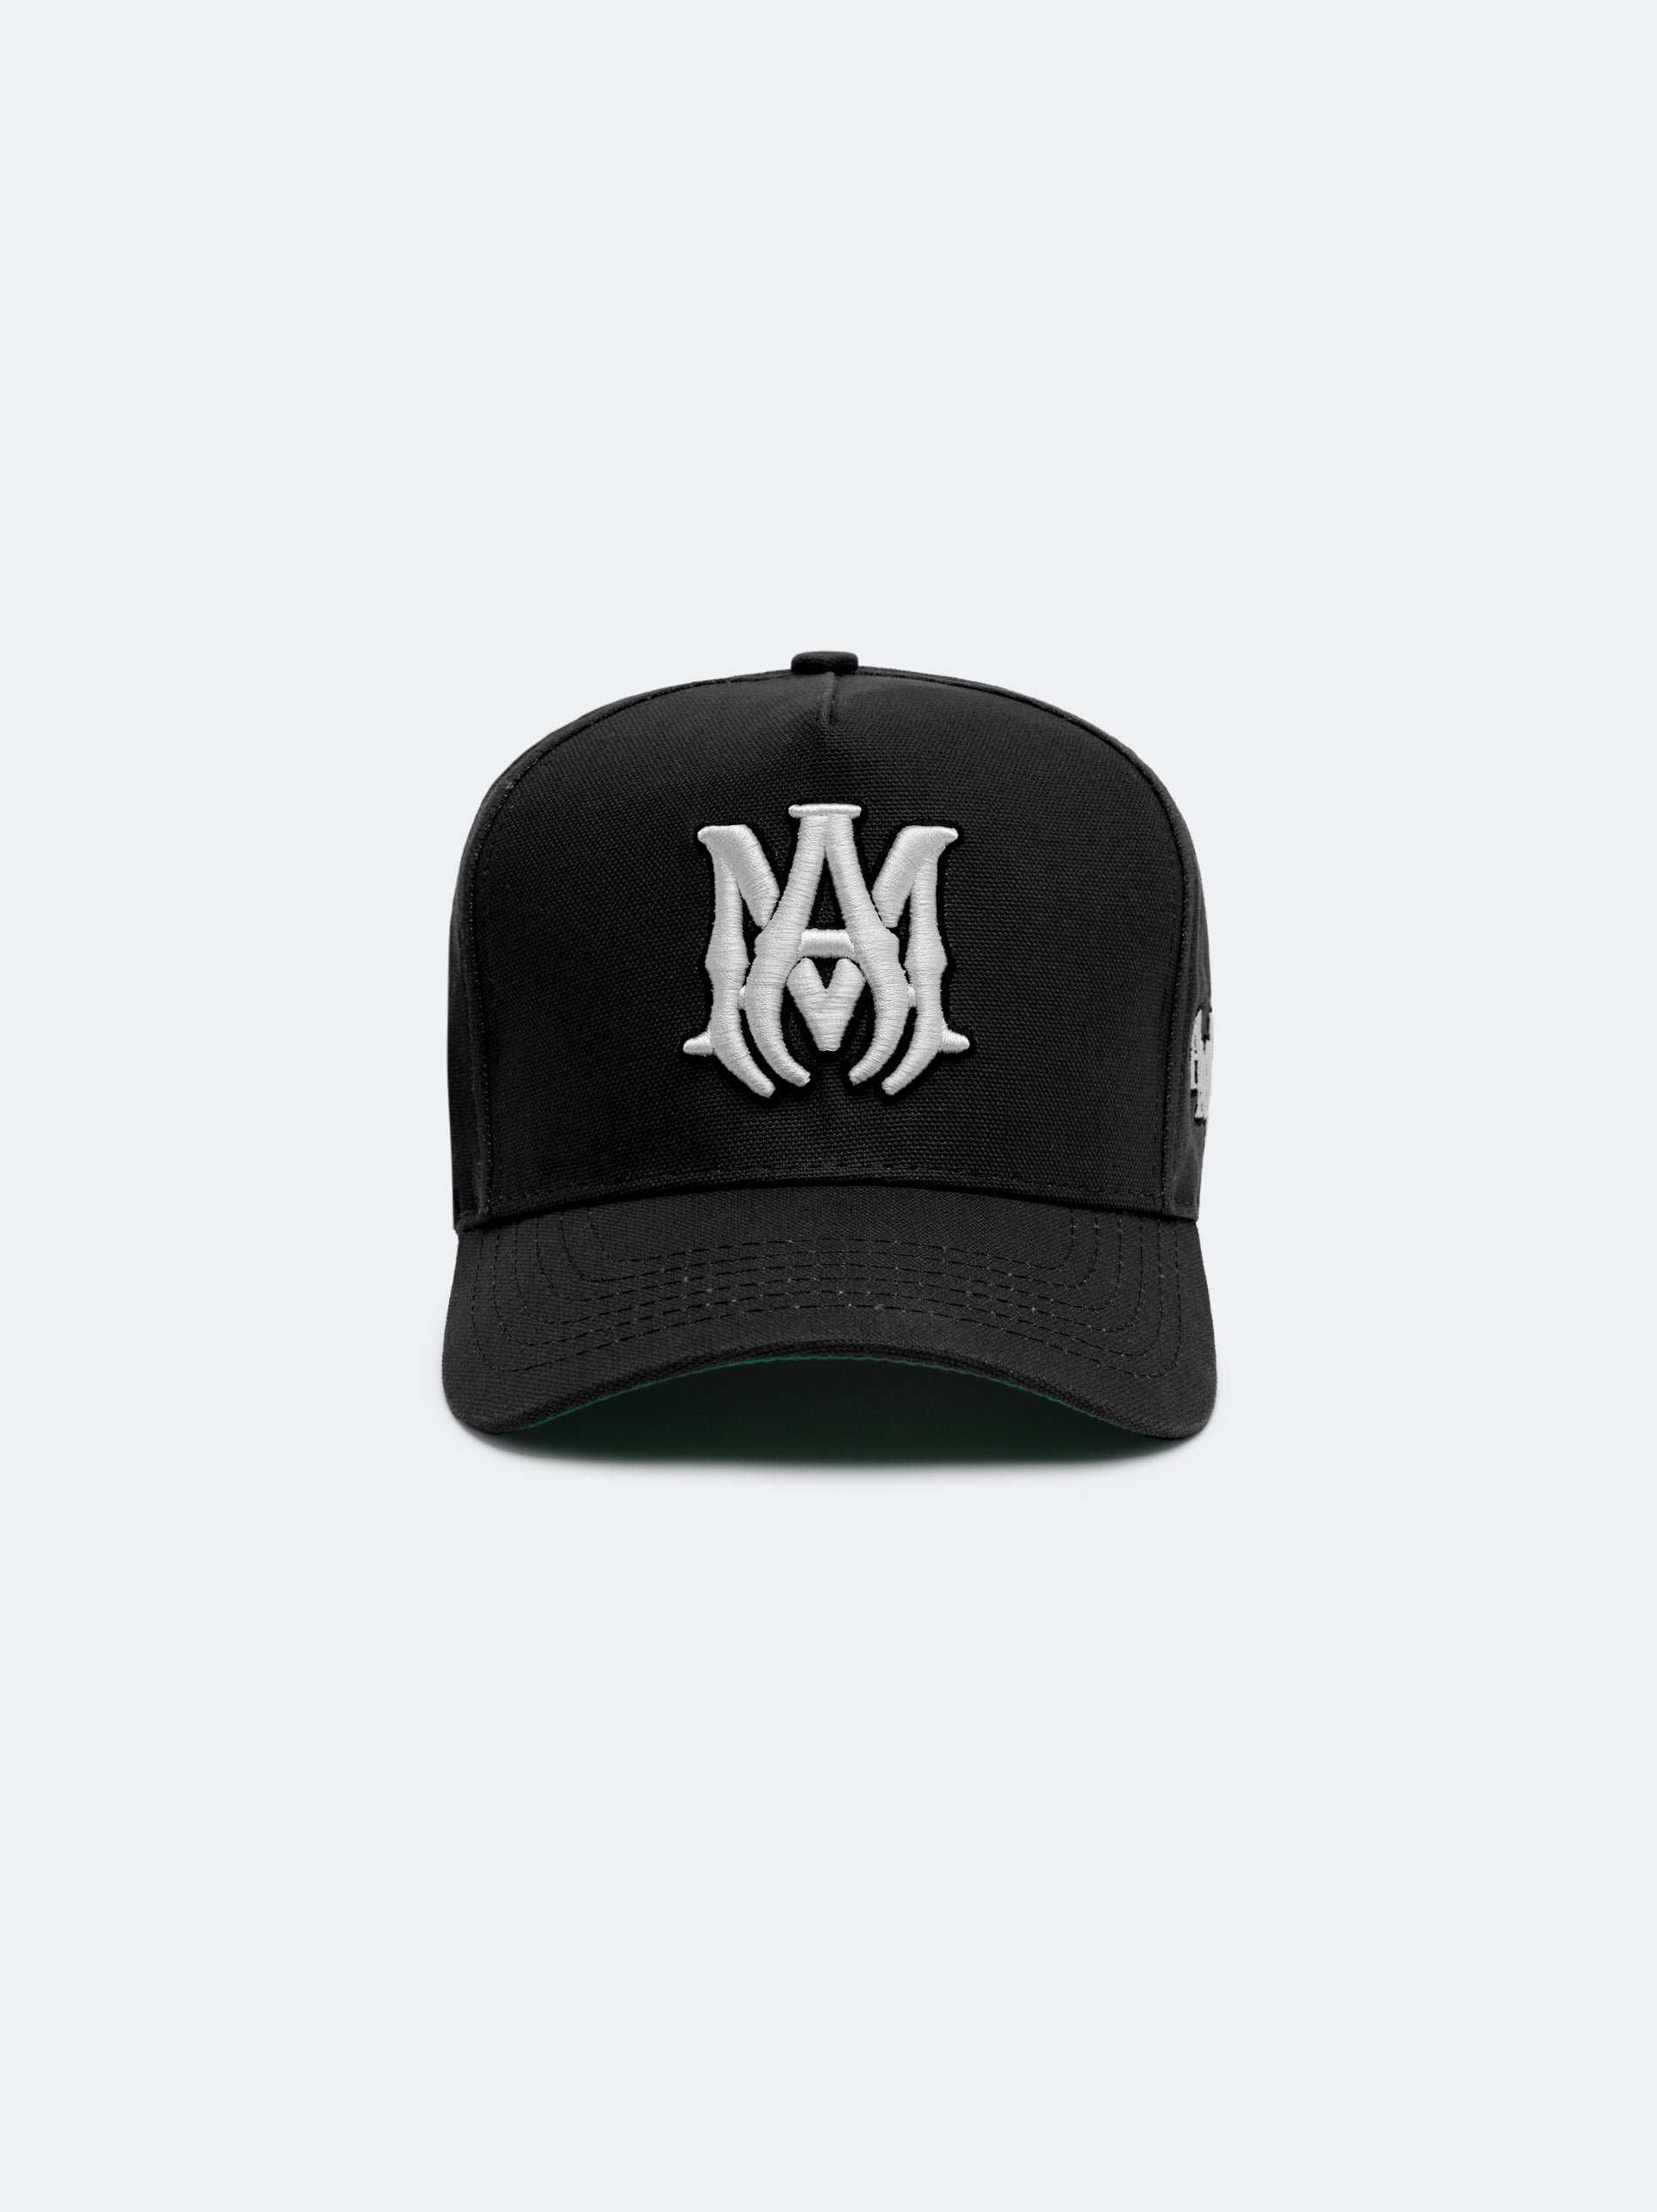 Product MA STAGGERED AMIRI FULL CANVAS HAT - Black Off White featured image